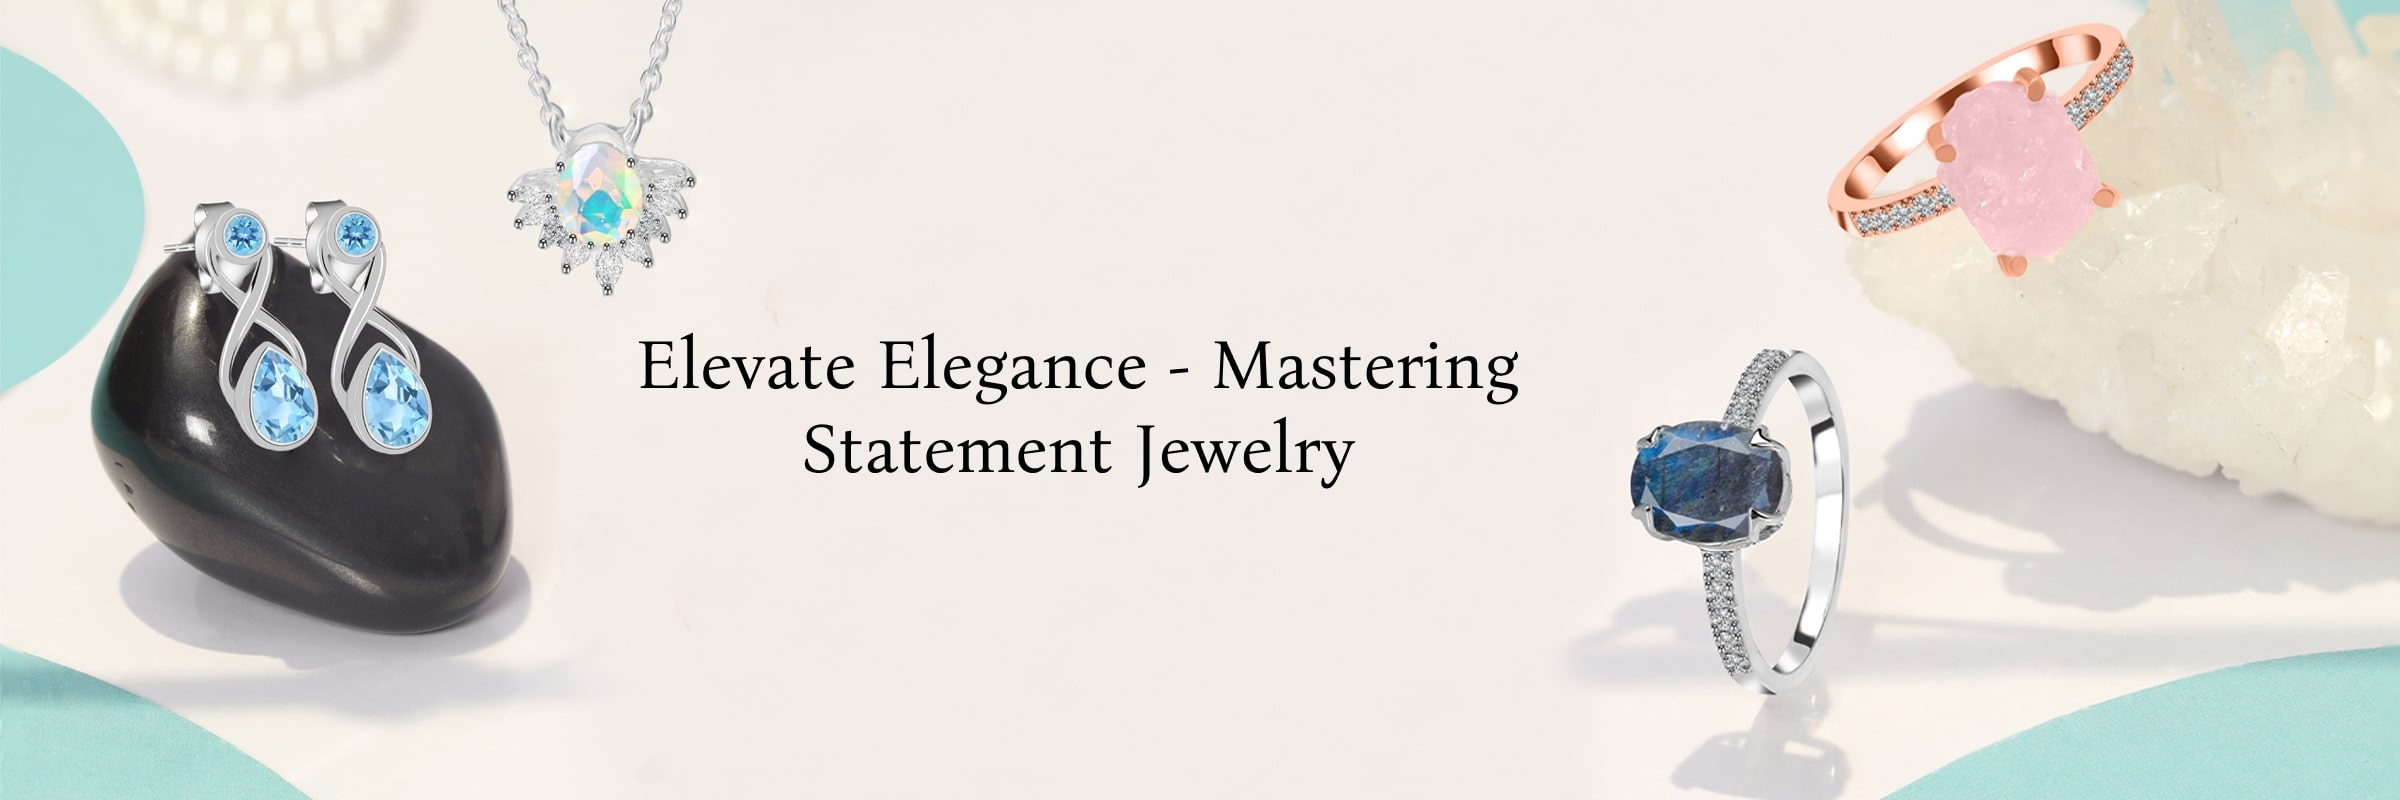 How to Style Statement Jewelry